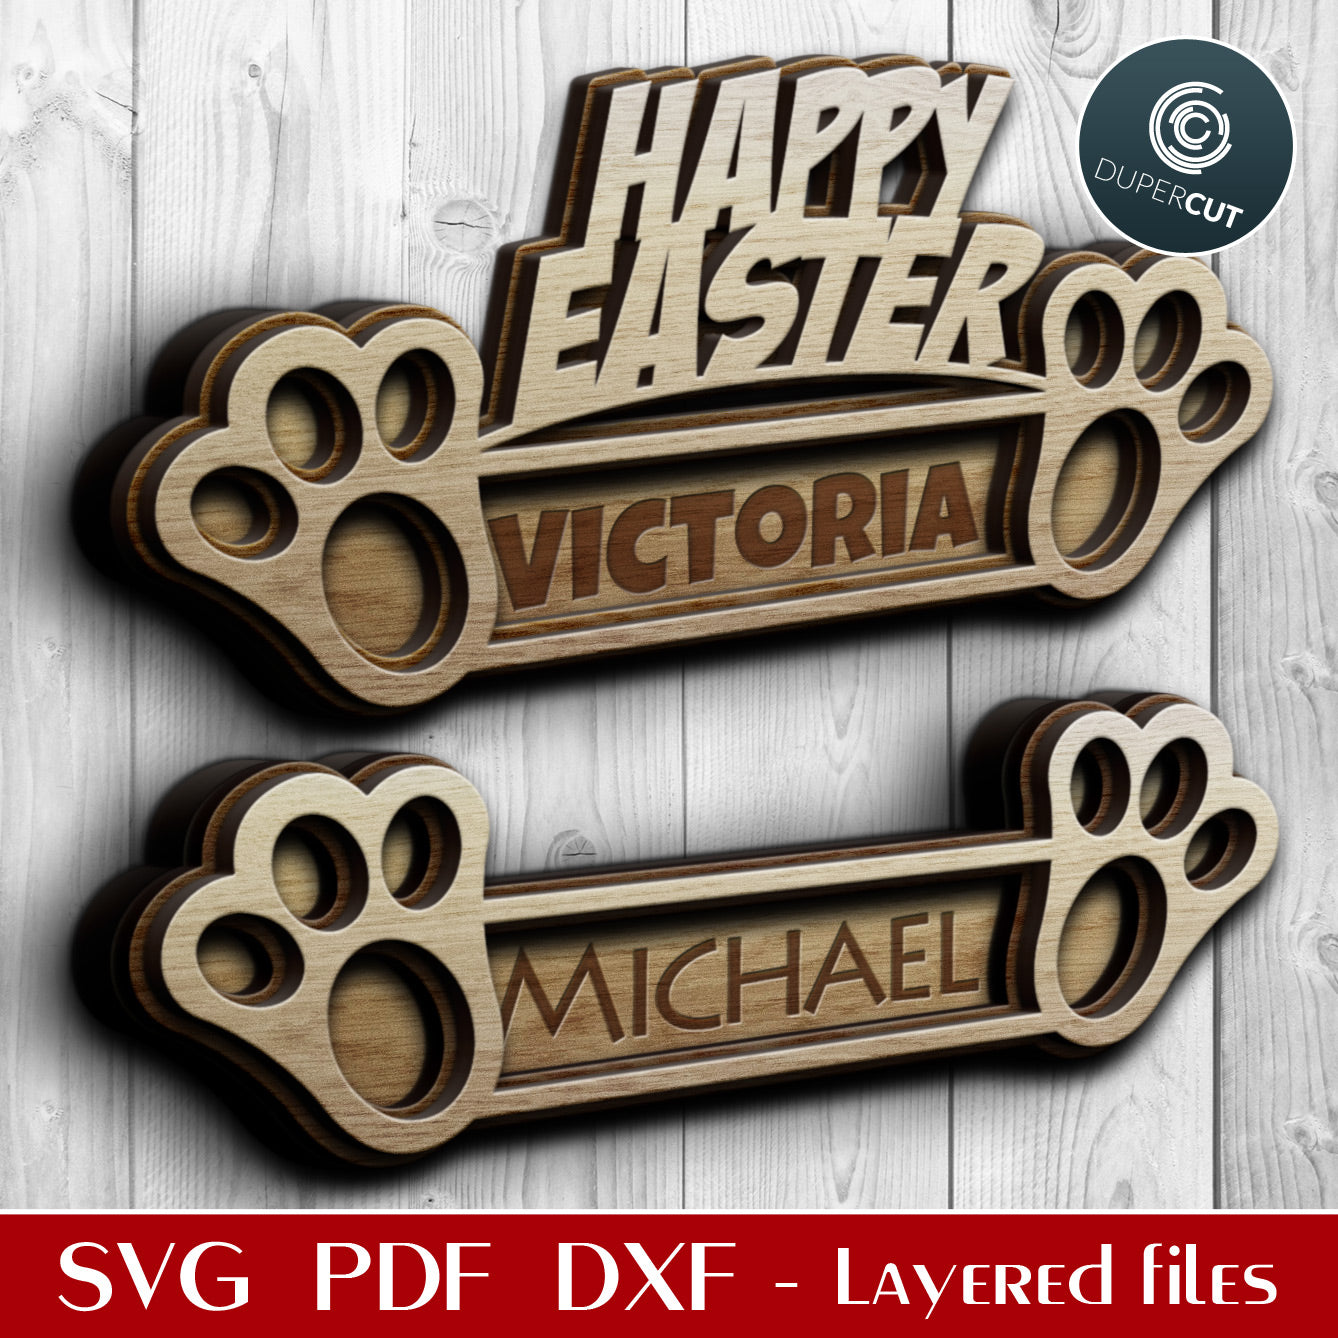 Layered Easter name tags - add custom text - SVG PDF DXF vector files for laser cutting with Glowforge, Cricut, Silhouette Cameo, CNC plasma machines